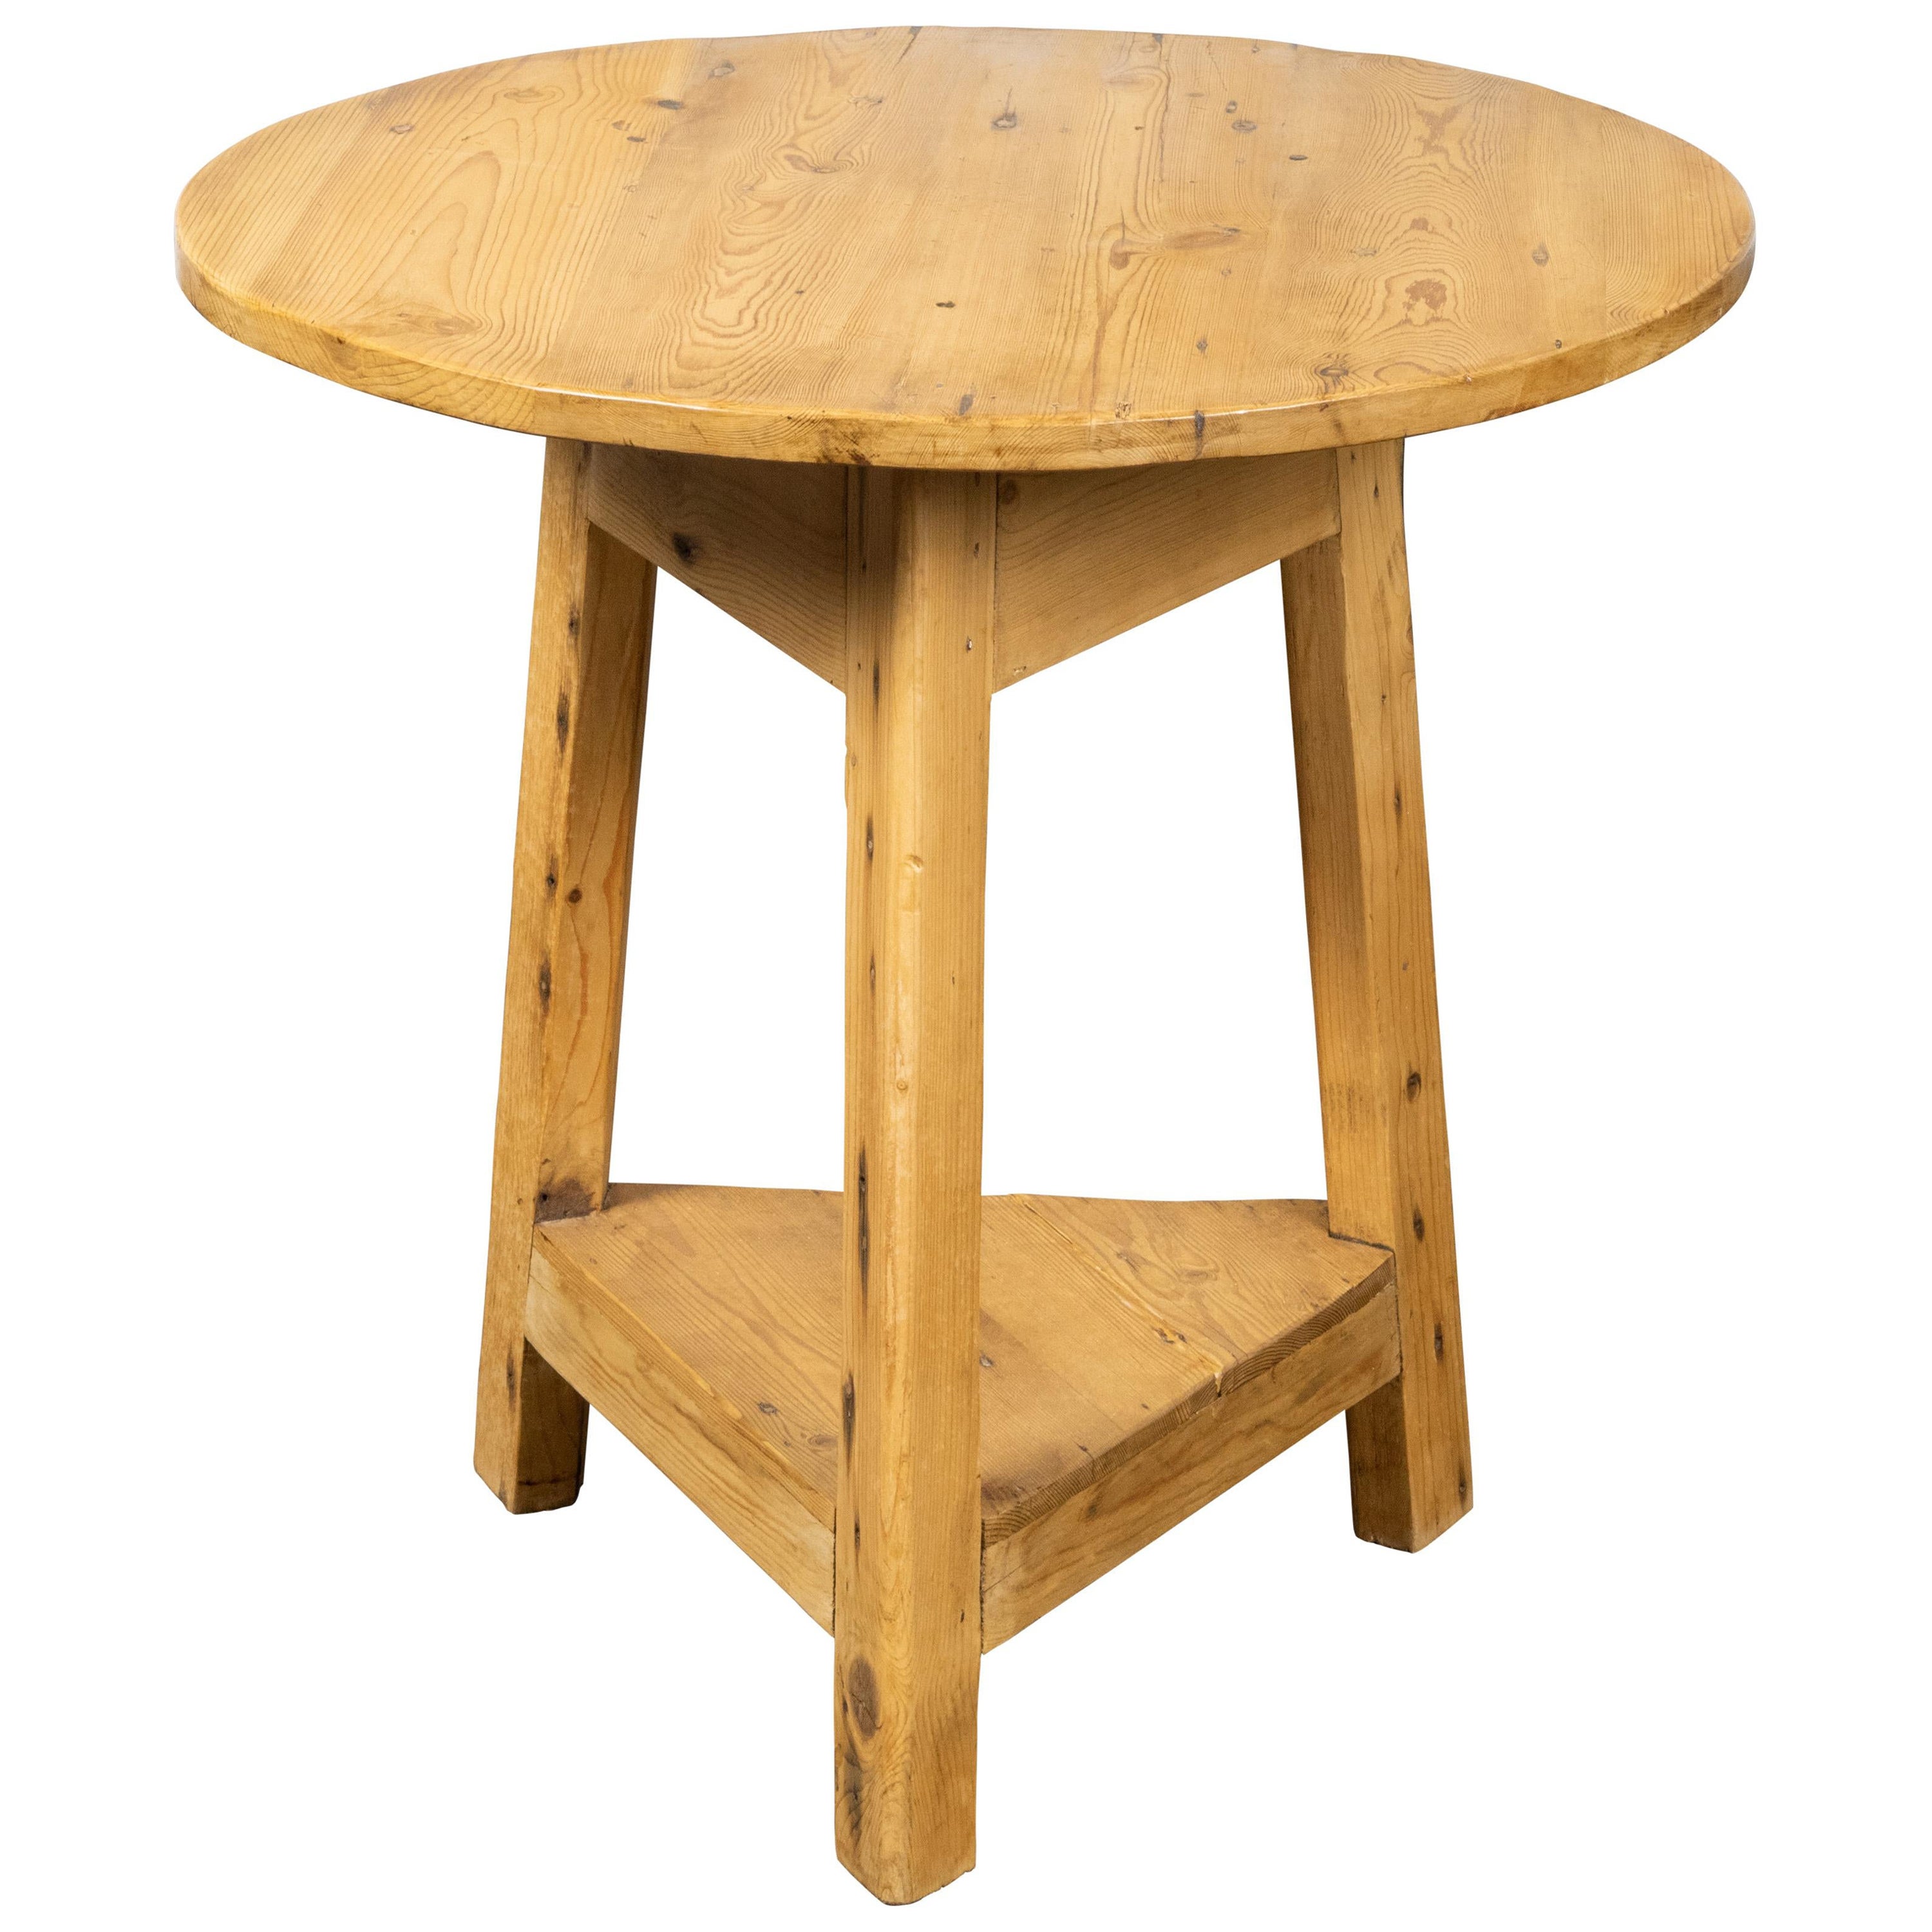 English 19th Century Pine Cricket Table with Circular Top and Triangular Shelf For Sale